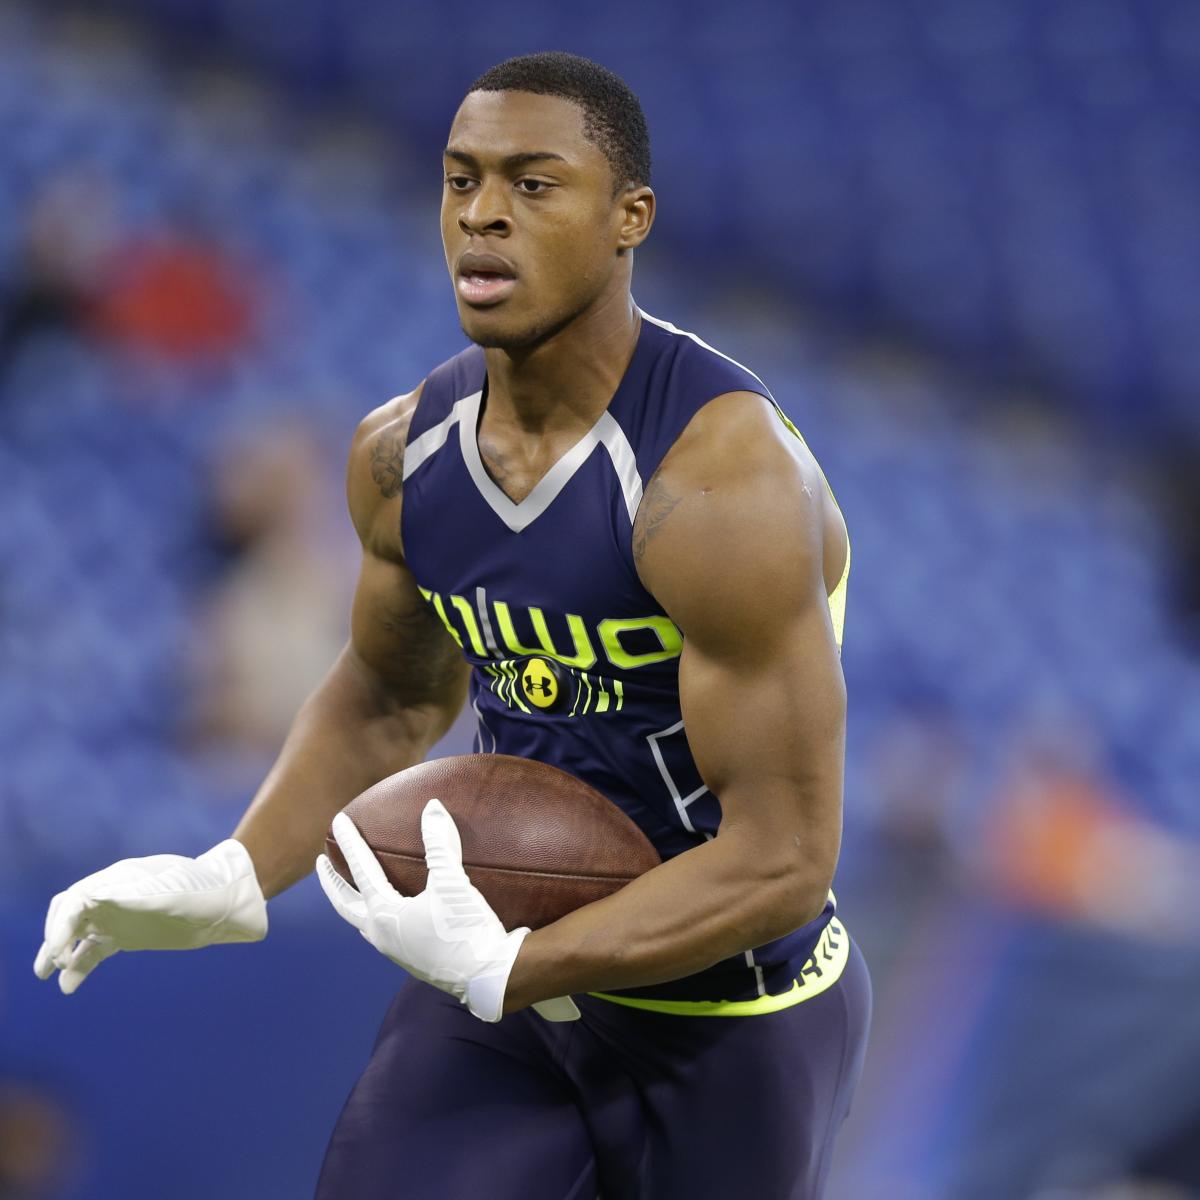 Watch: NFL wideout Allen Robinson shows off his lower-body 